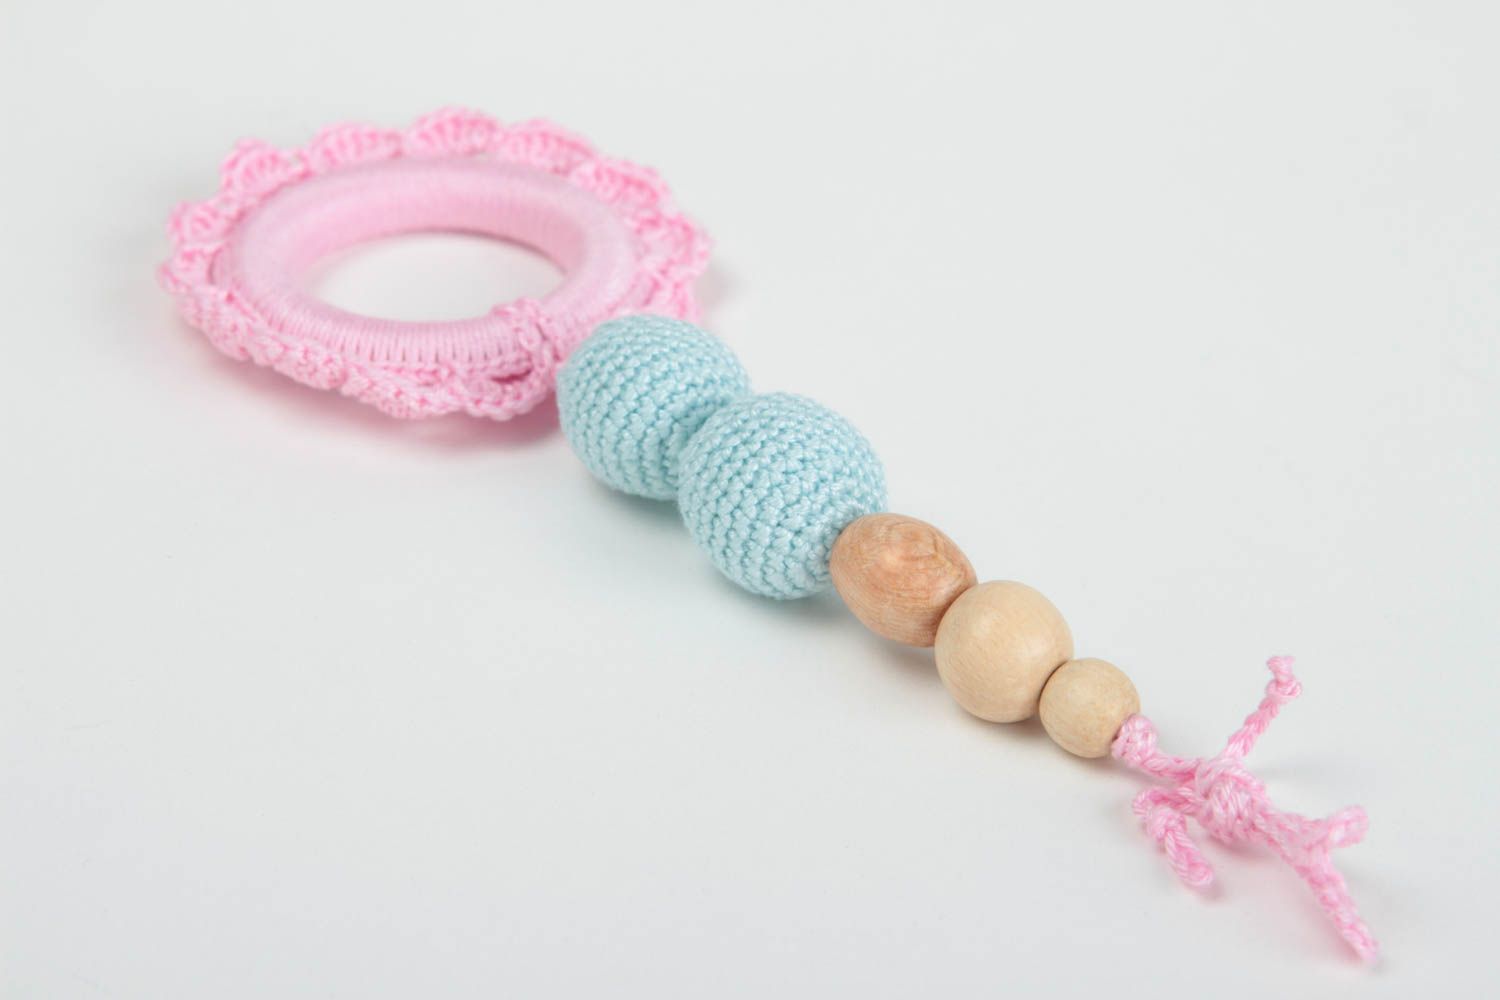 Unusual handcrafted wooden baby teether toy eco accessories for kids gift ideas photo 4